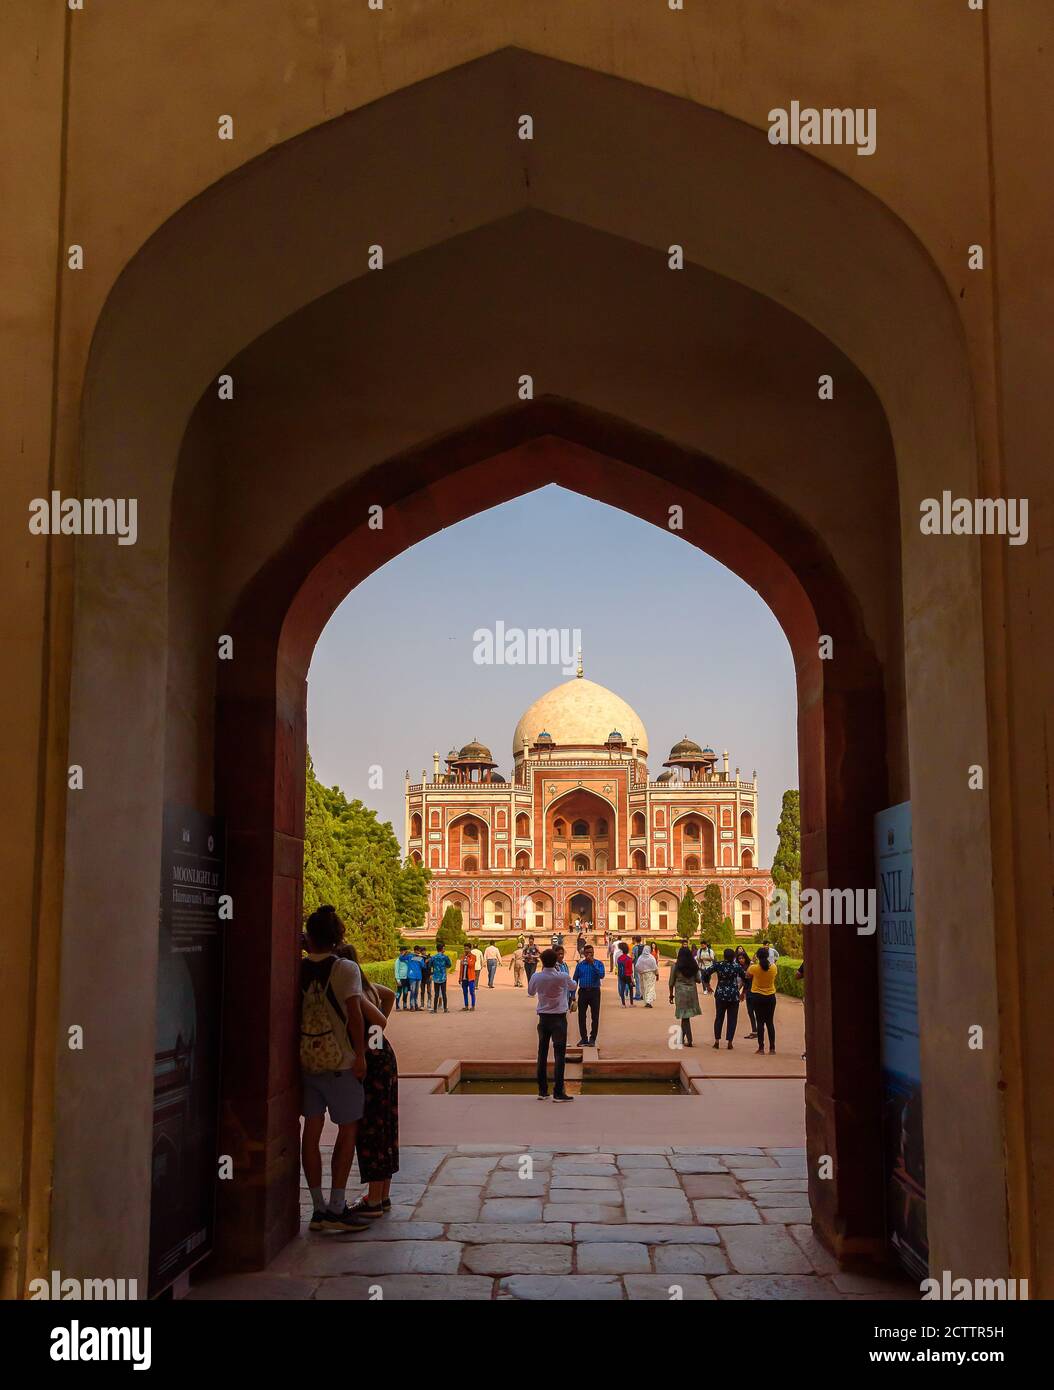 October 11, 2019.  In Frame the Humayun's tomb , the tomb of the Mughal Emperor Humayun in Delhi, India. Stock Photo